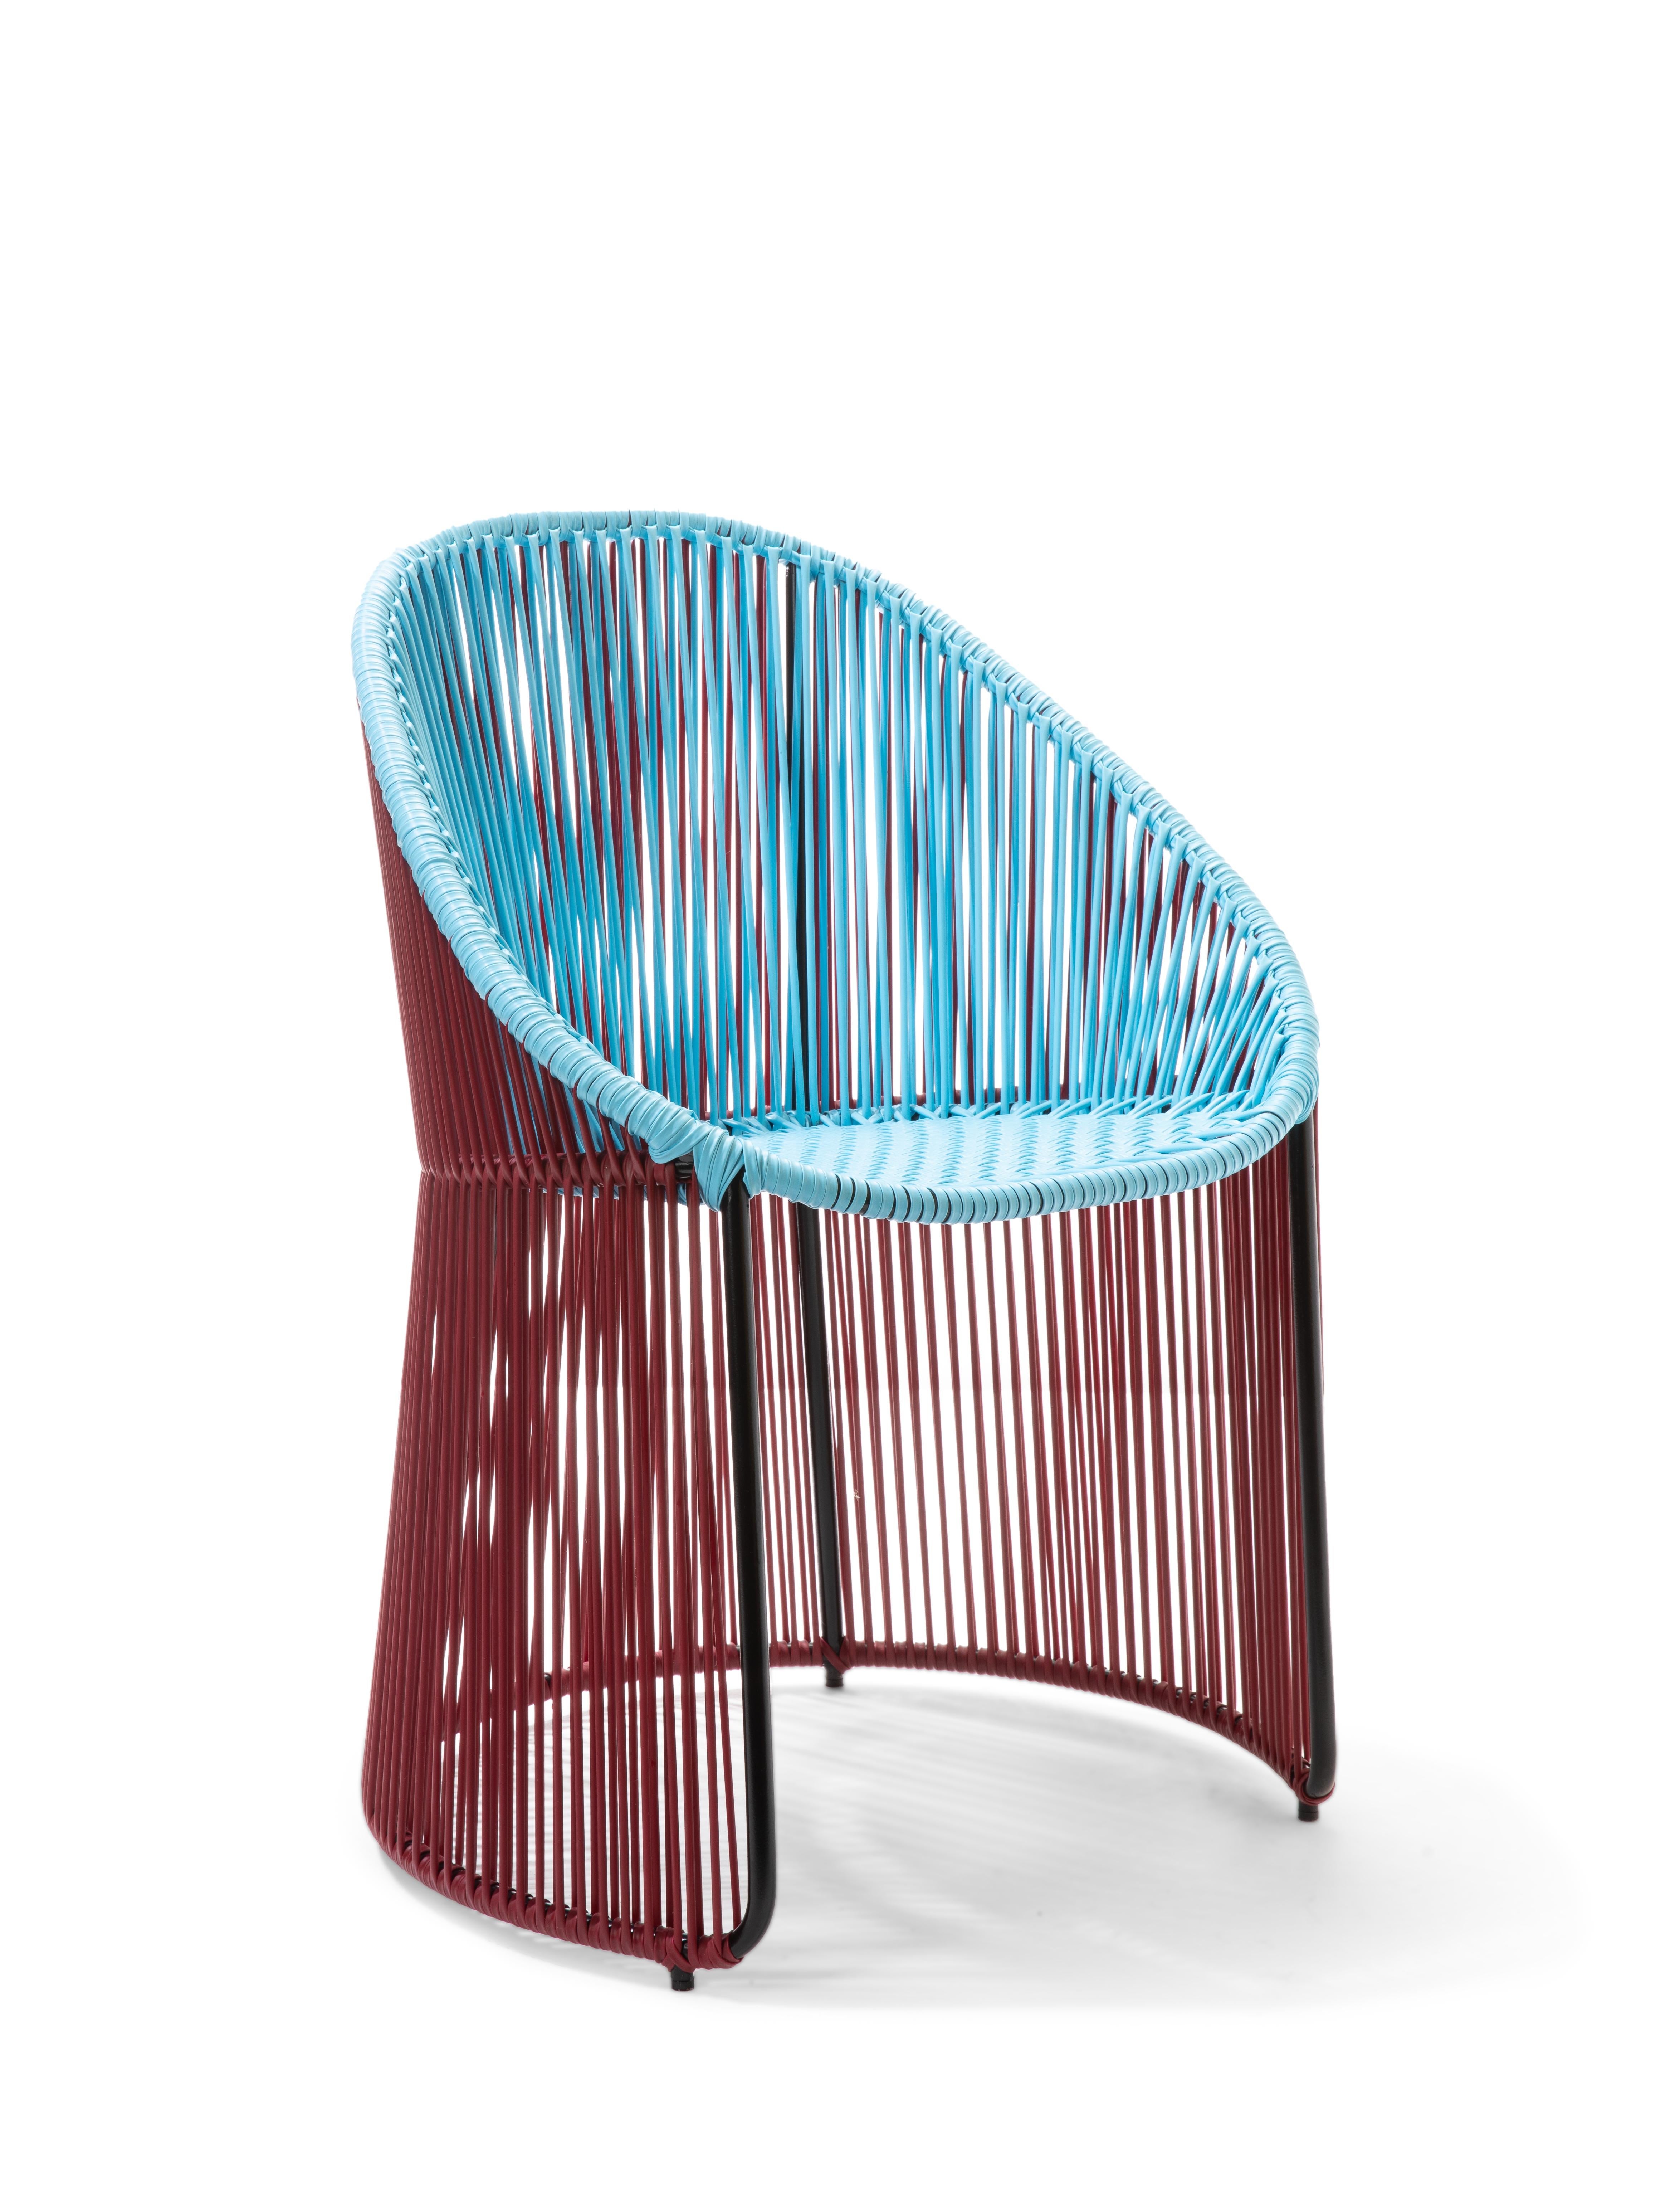 Set of 4 Blue pastel/purple cartagenas dining chair by Sebastian Herkner
Materials: PVC strings. Galvanized and powder-coated tubular steel frame
Technique: made from recycled plastic. Weaved by local craftspeople in Colombia. 
Dimensions: W 60.2